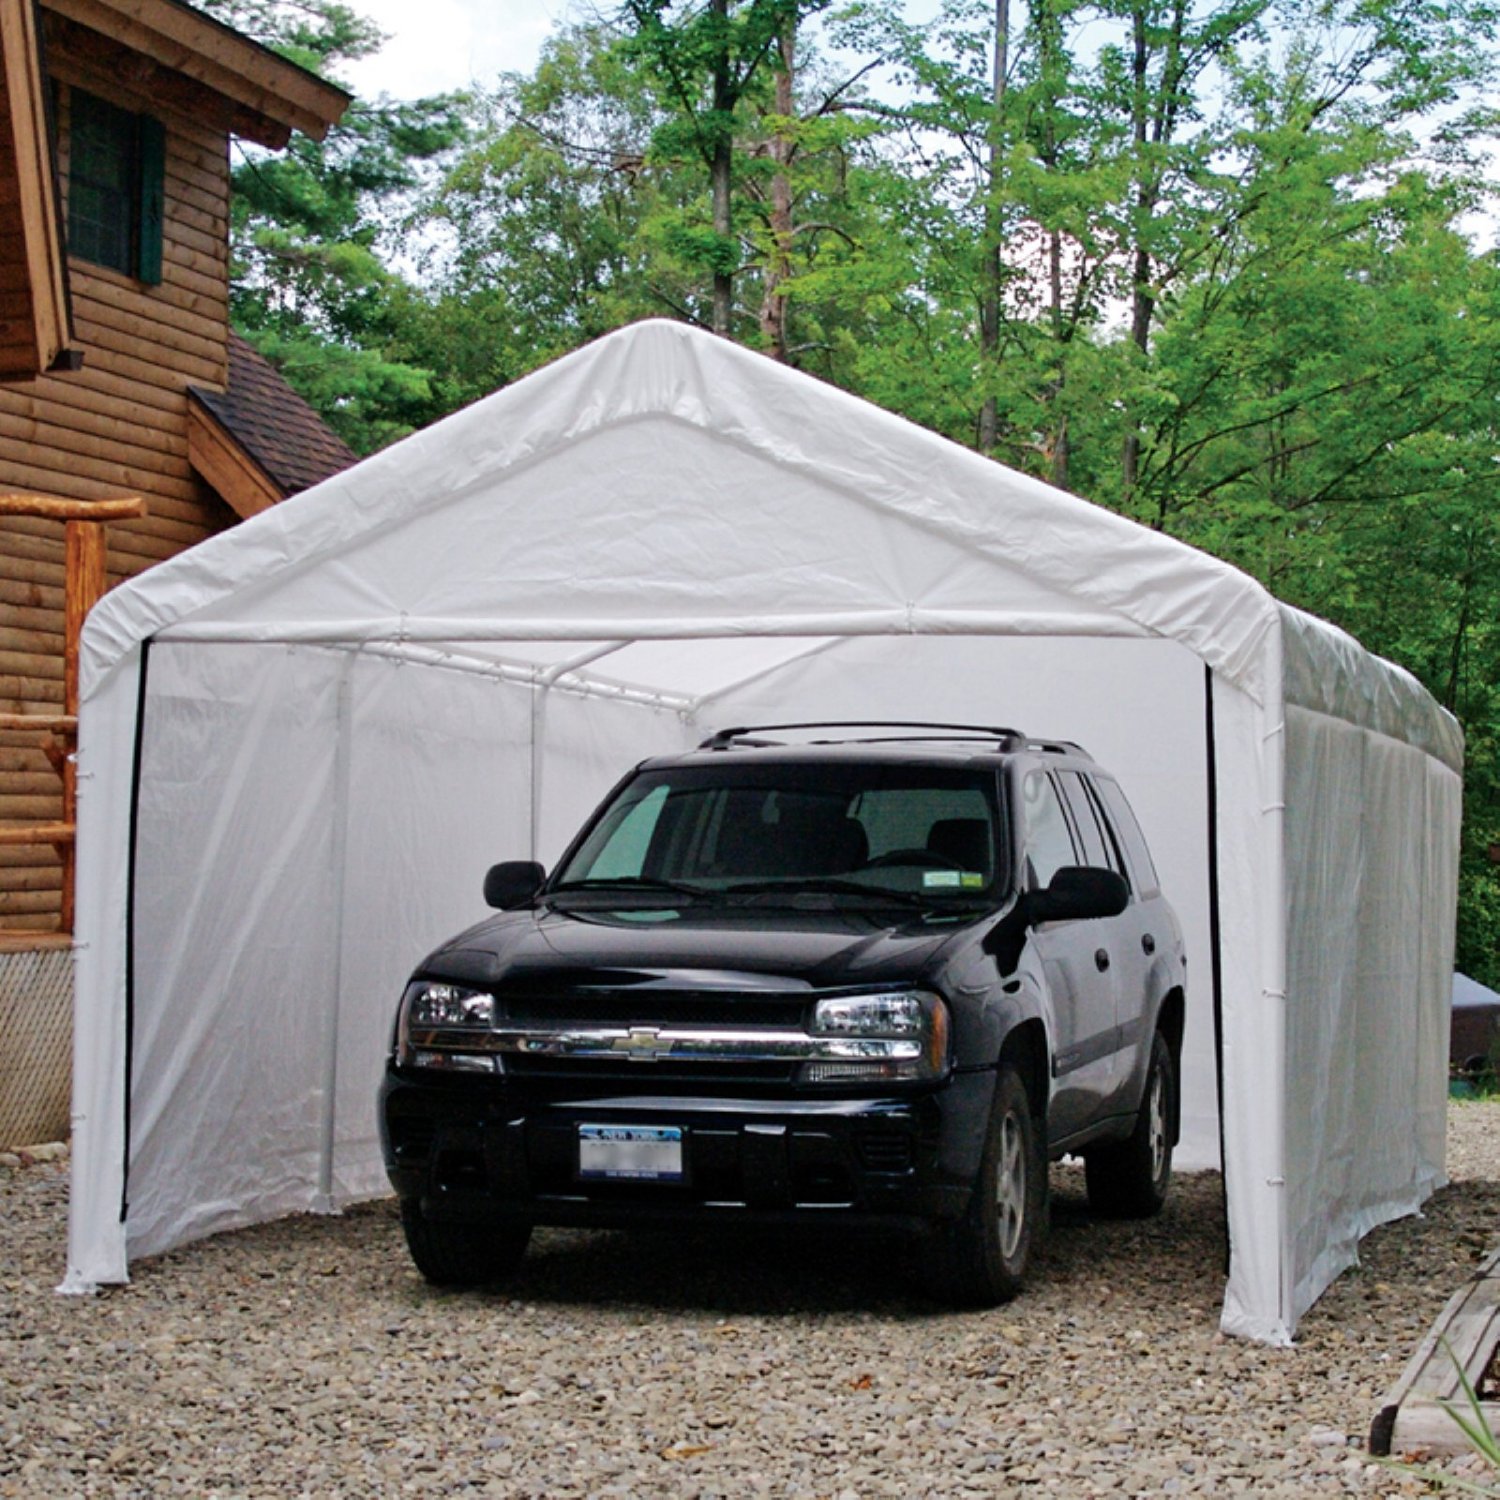 car canopy enclosure kit - white, canopy not included UCQVXVP